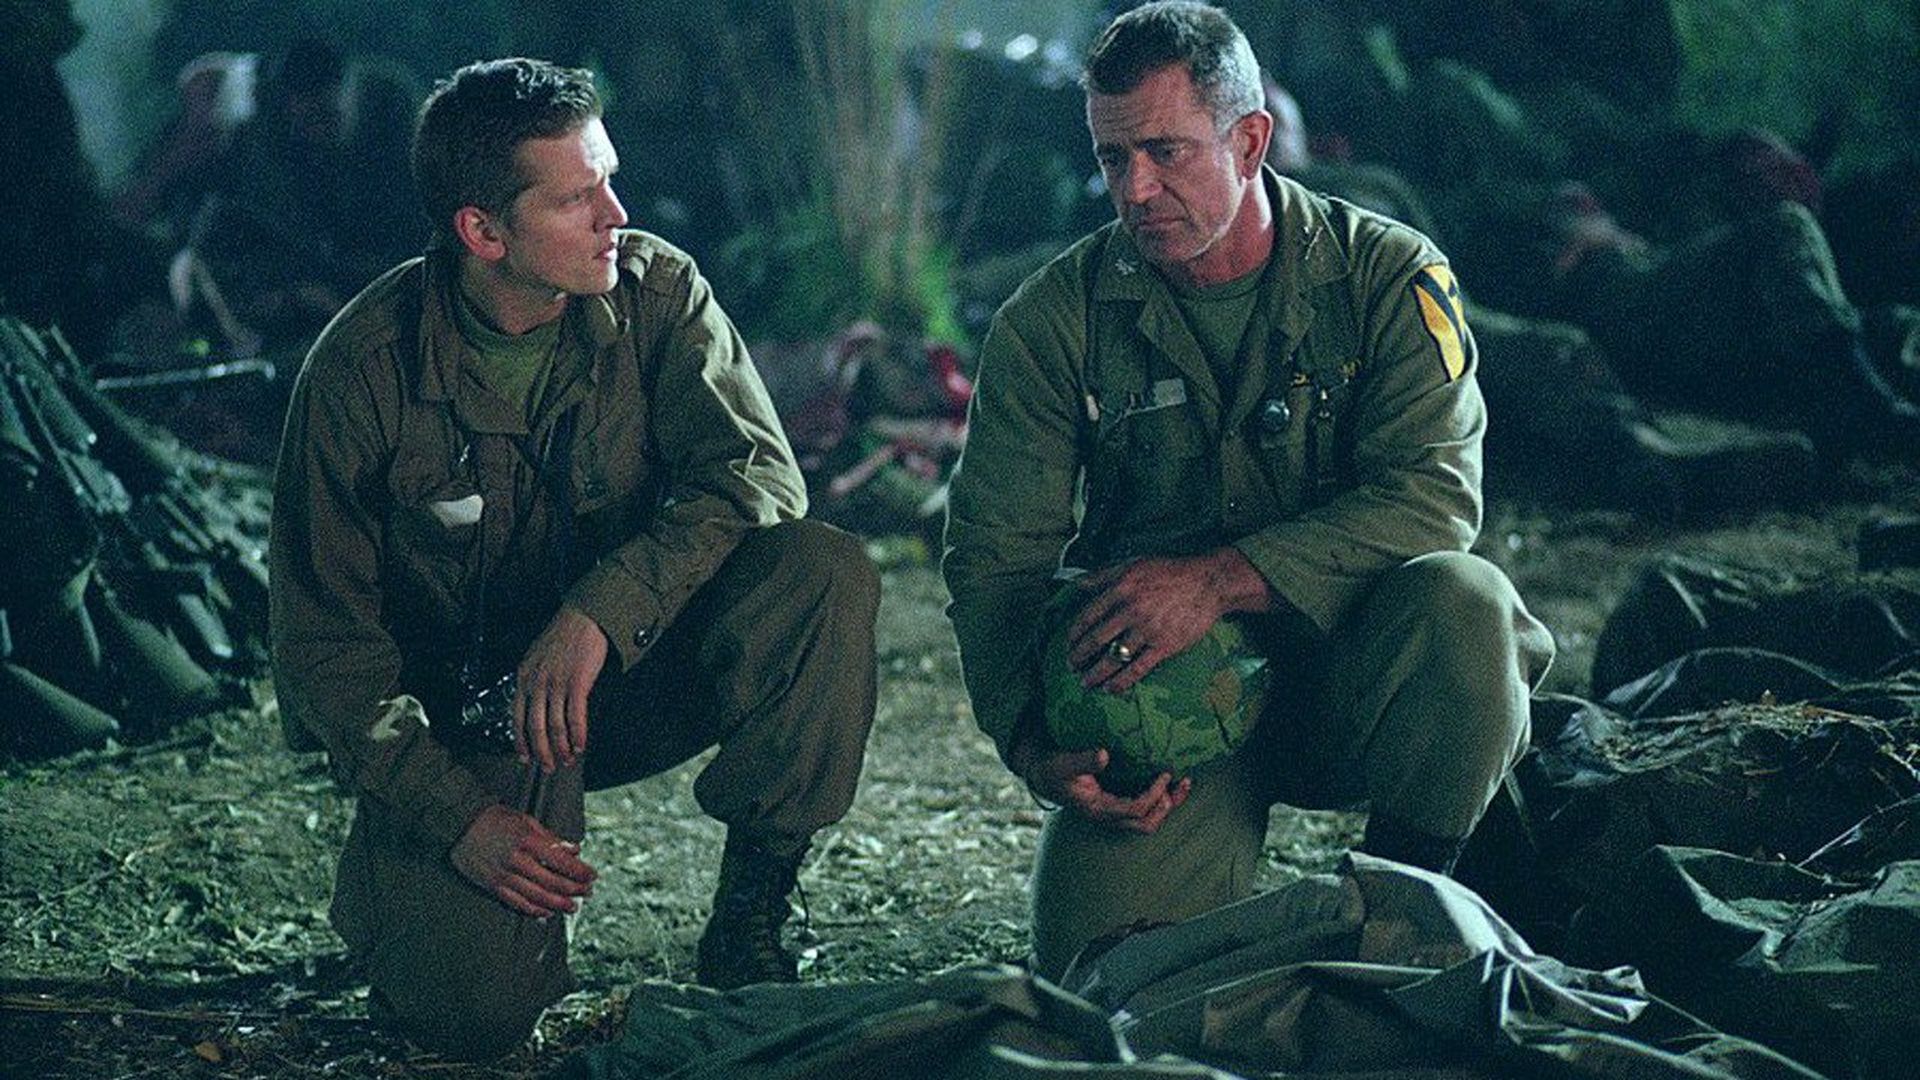 How well do you remember the movie We Were Soldiers?